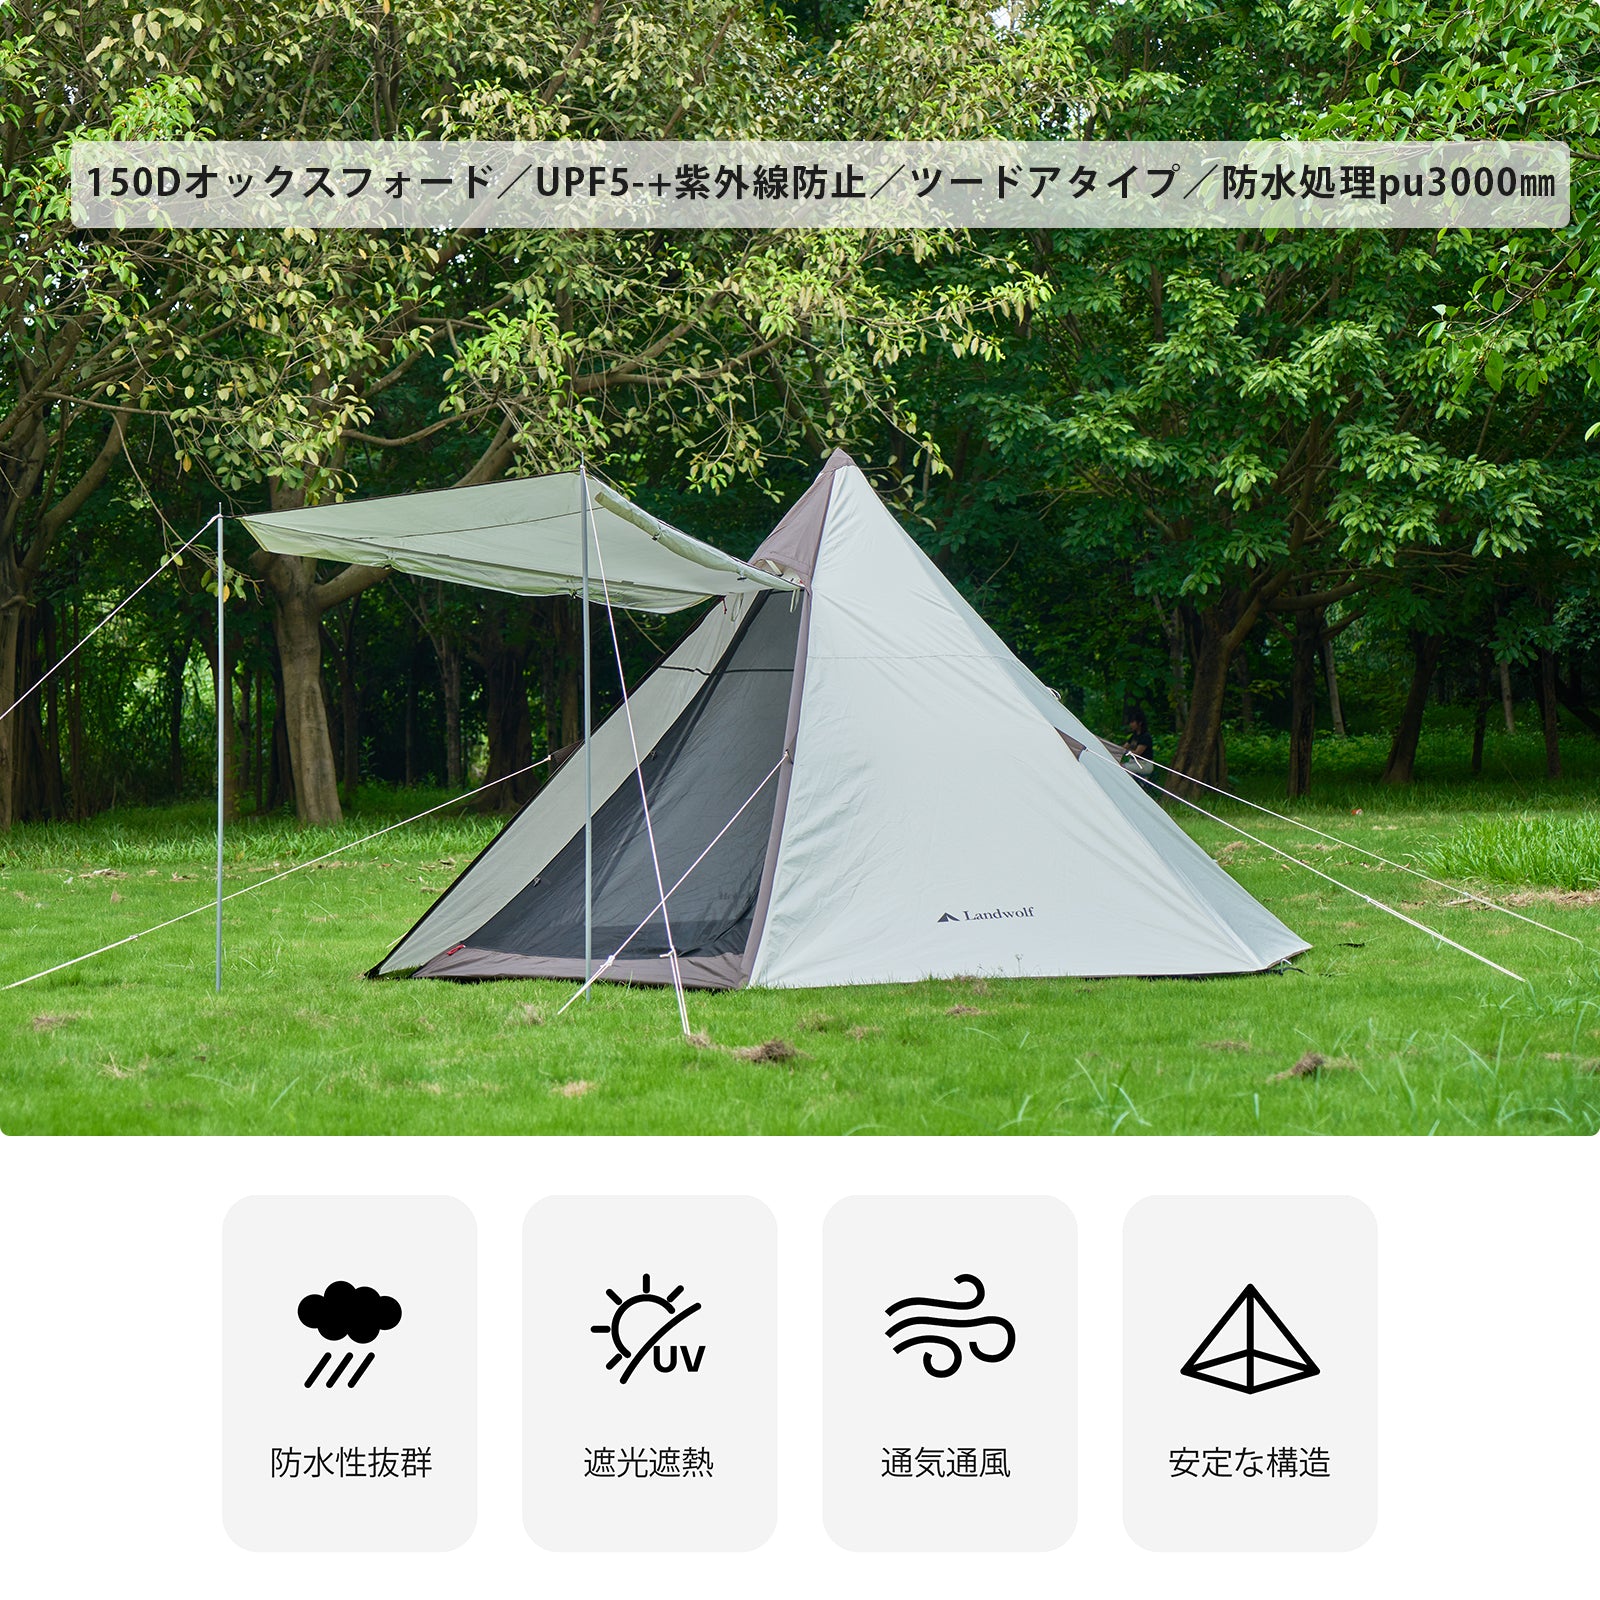 Double-layered Style Wilderness Indian Tent Without Center Pole テント